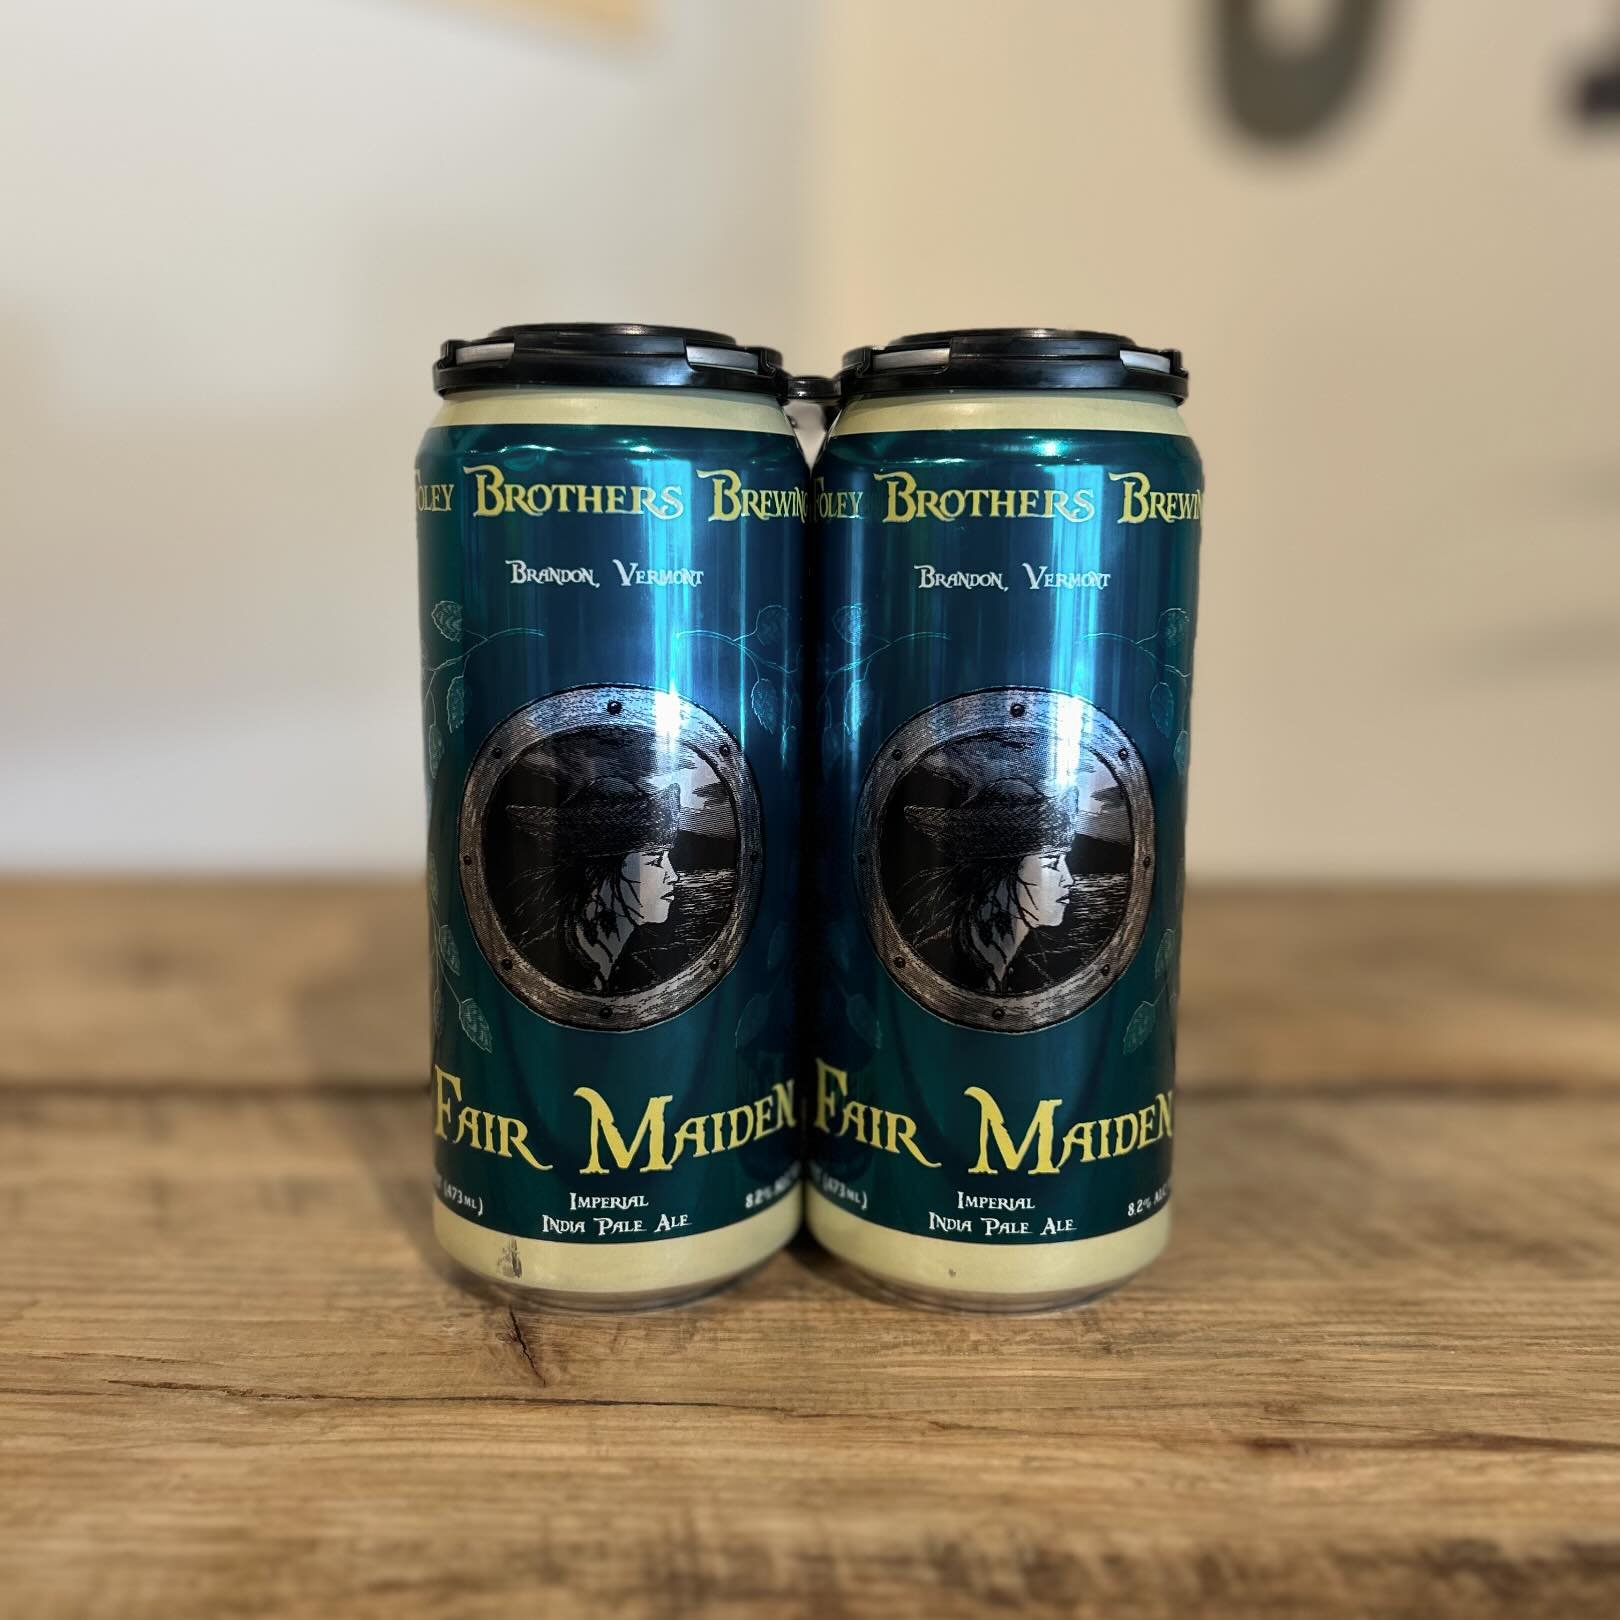 @foleybrothers is back in the shop this week #NowAvailable #SudburyCraftBeer #SudburyMA
&mdash;
Fair Maiden | Imperial IPA | 8.2% ABV

A well balanced DIPA brewed with seven hop varieties from the USA, Germany, and New Zealand. Unfiltered with aromas